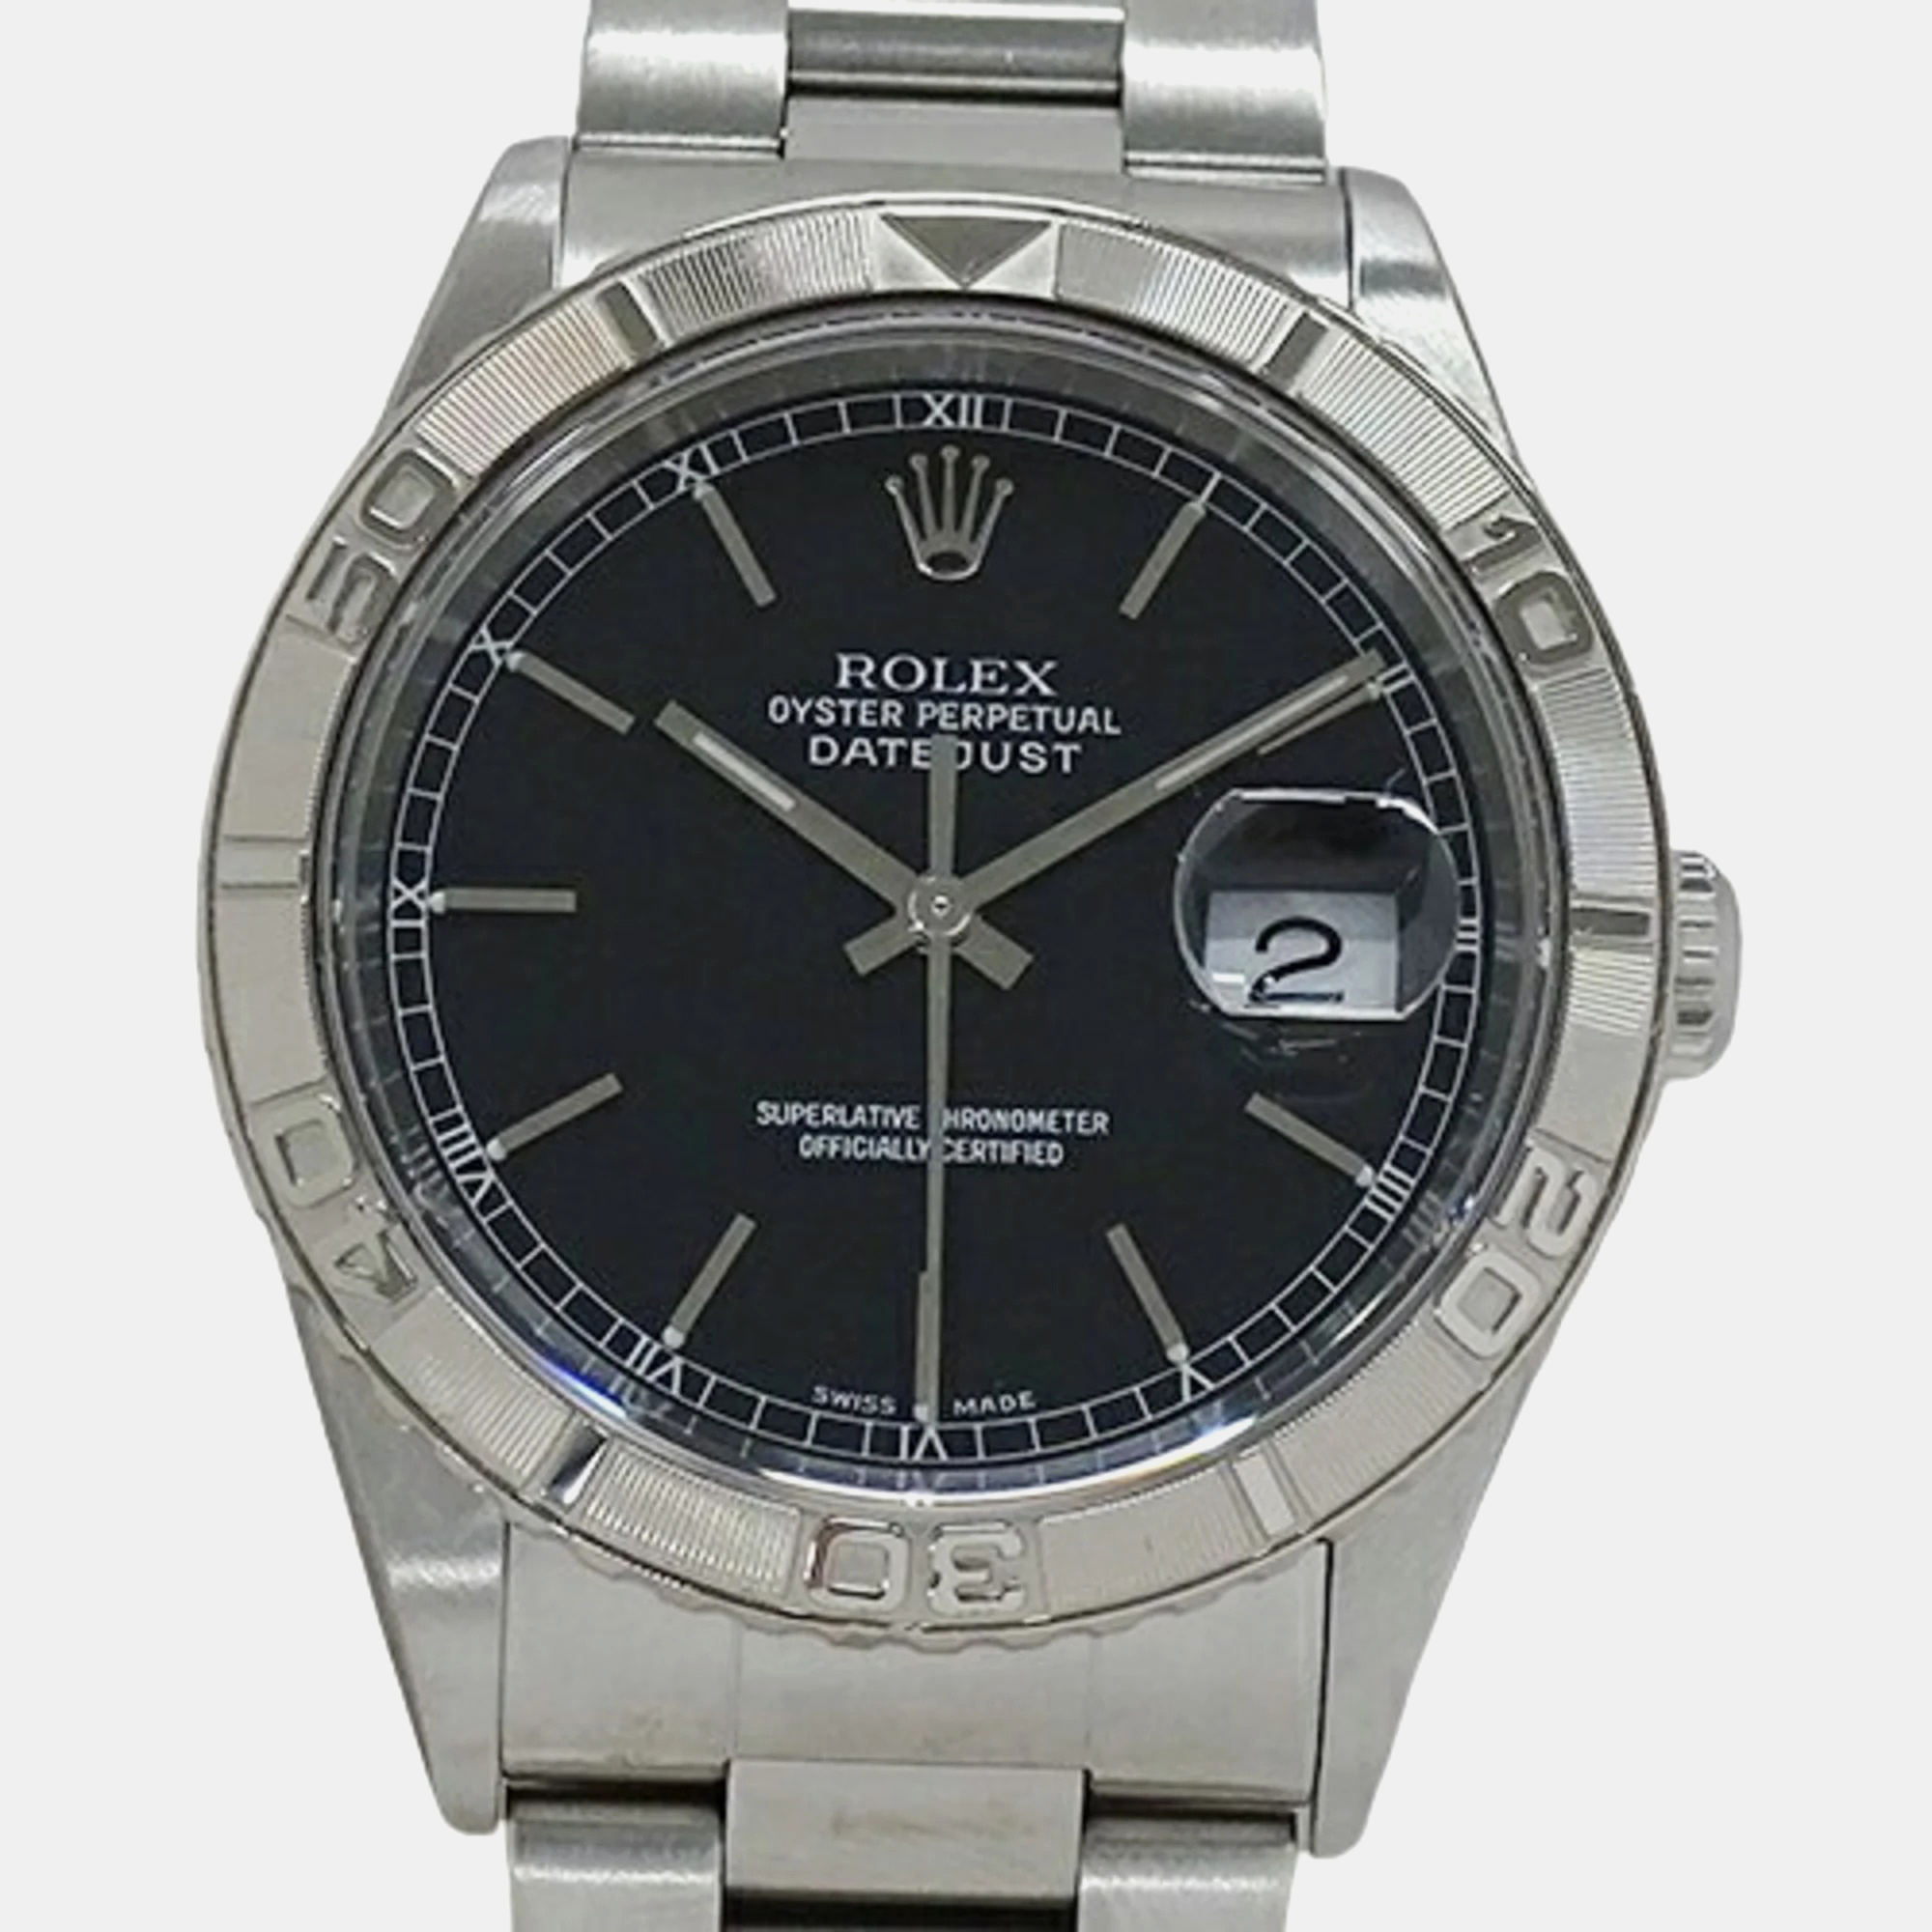 Rolex black 18k white gold stainless steel datejust 16264 automatic men's wristwatch 36 mm